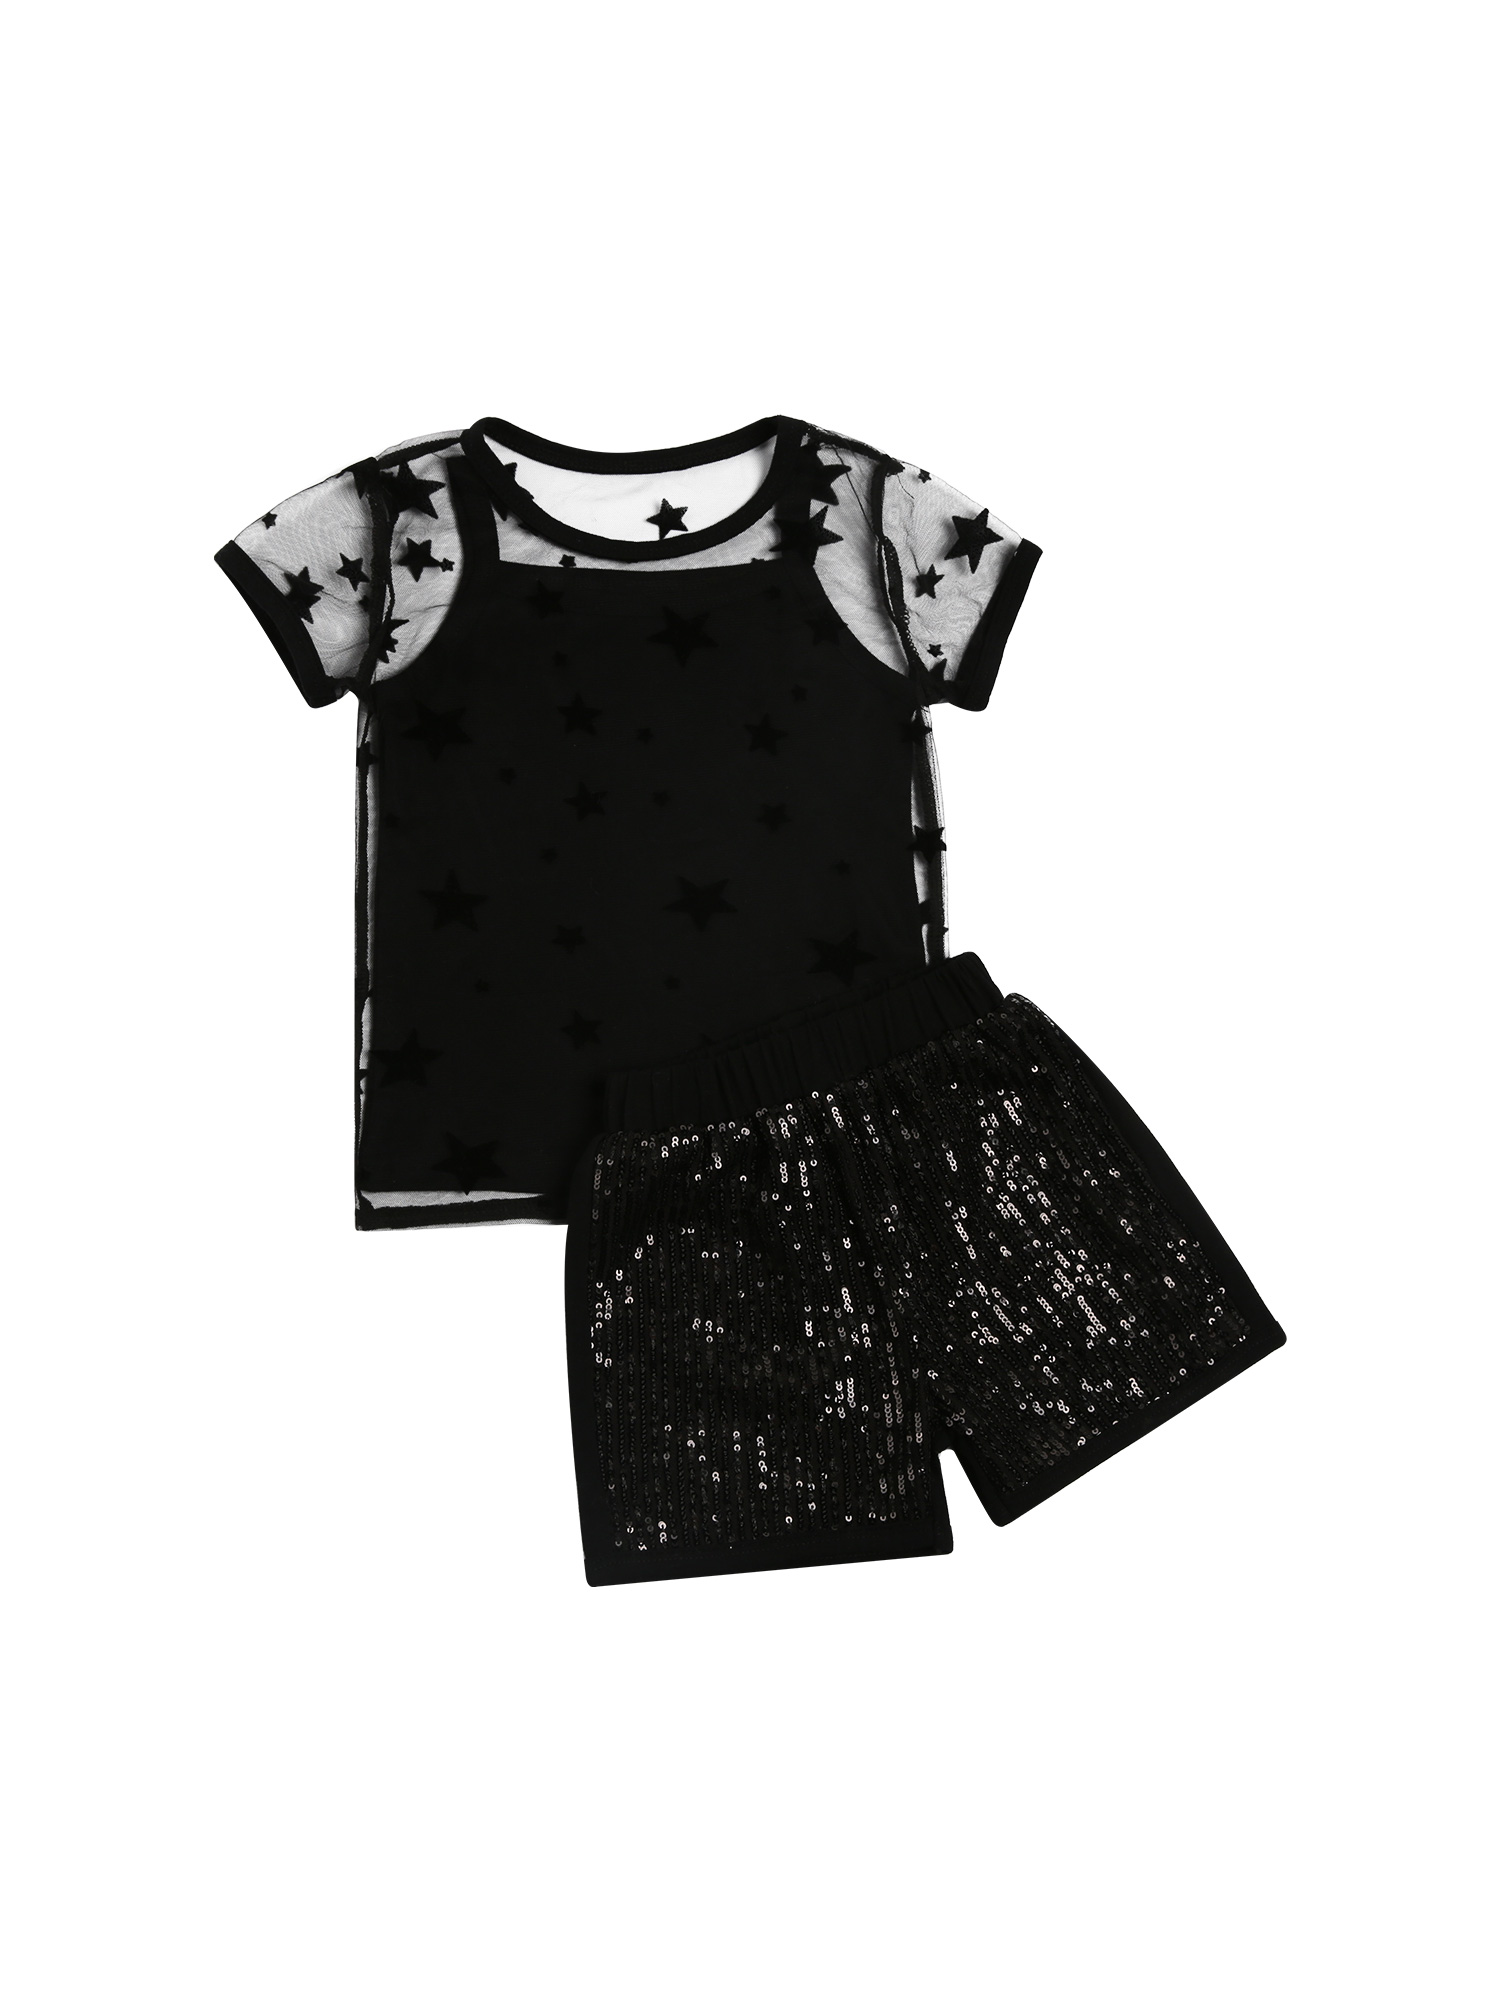 Xiaoluokaixin Toddler Kids Baby Girl Clothes Short Sleeve Heart Print T-Shirt Tops Sequin Shorts Girls Summer Outfits Sets - image 5 of 5